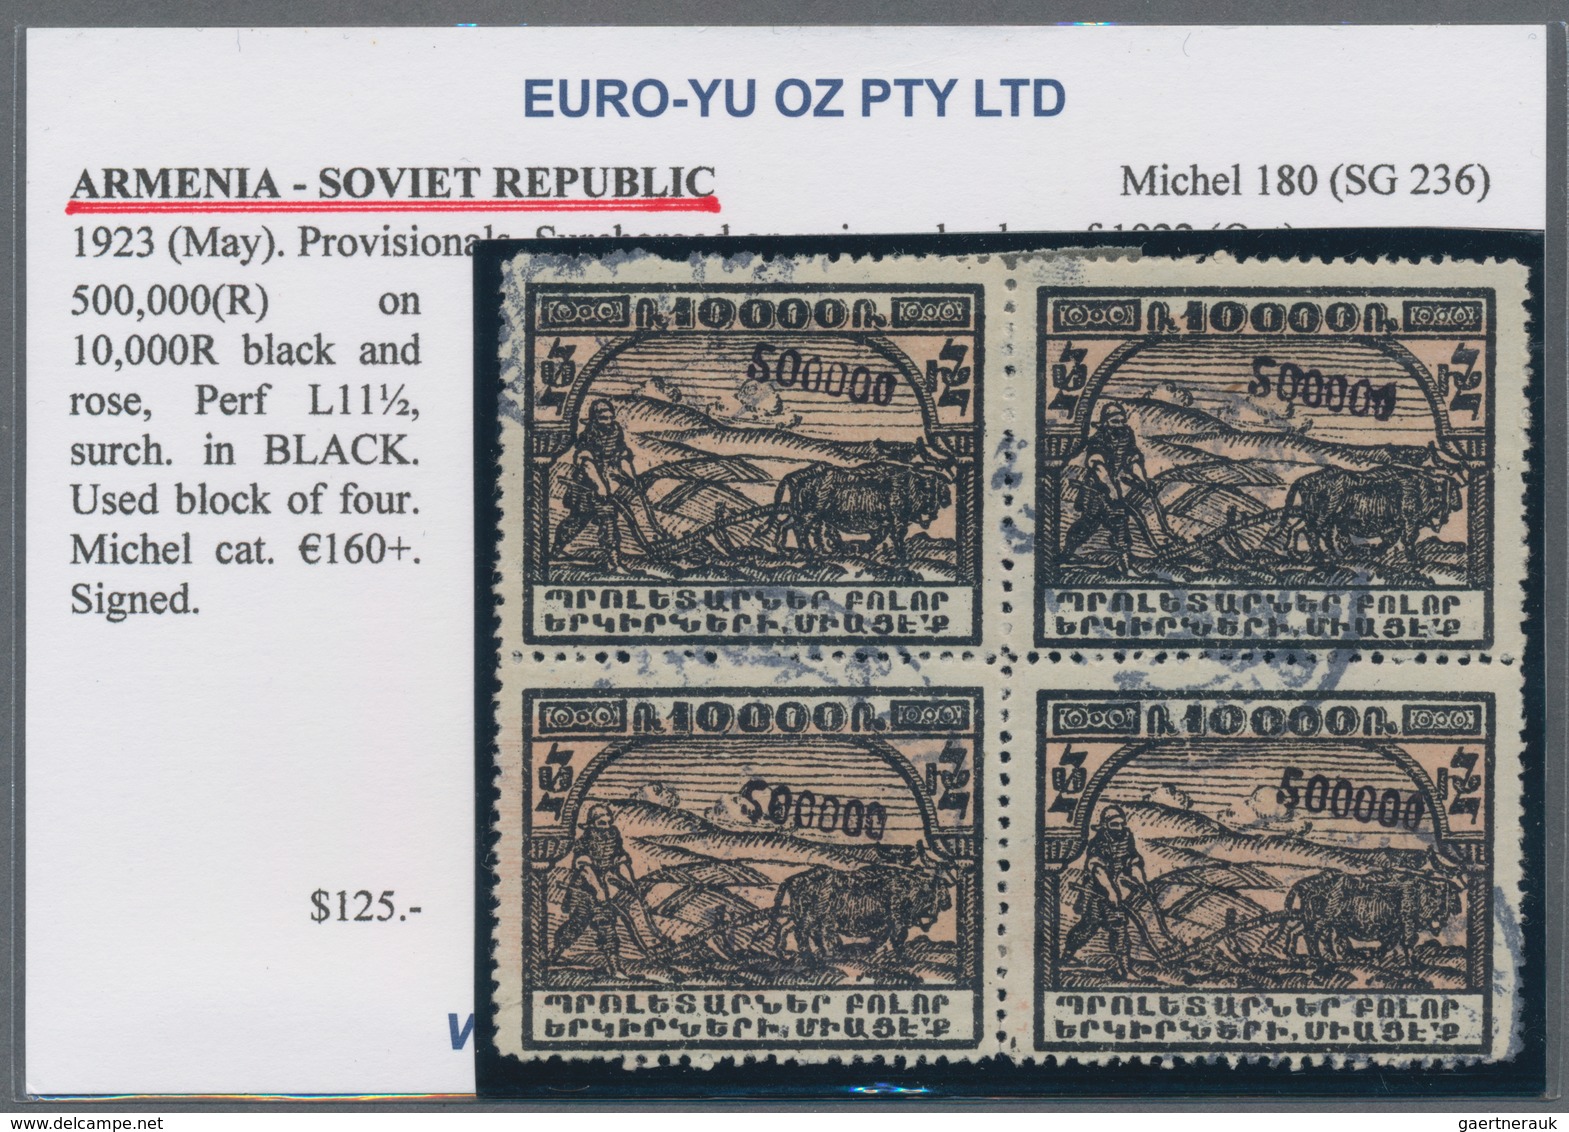 Armenien: 1919/1923, mint and used assortment of 30 stamps on retail cards, comprising unissued defi